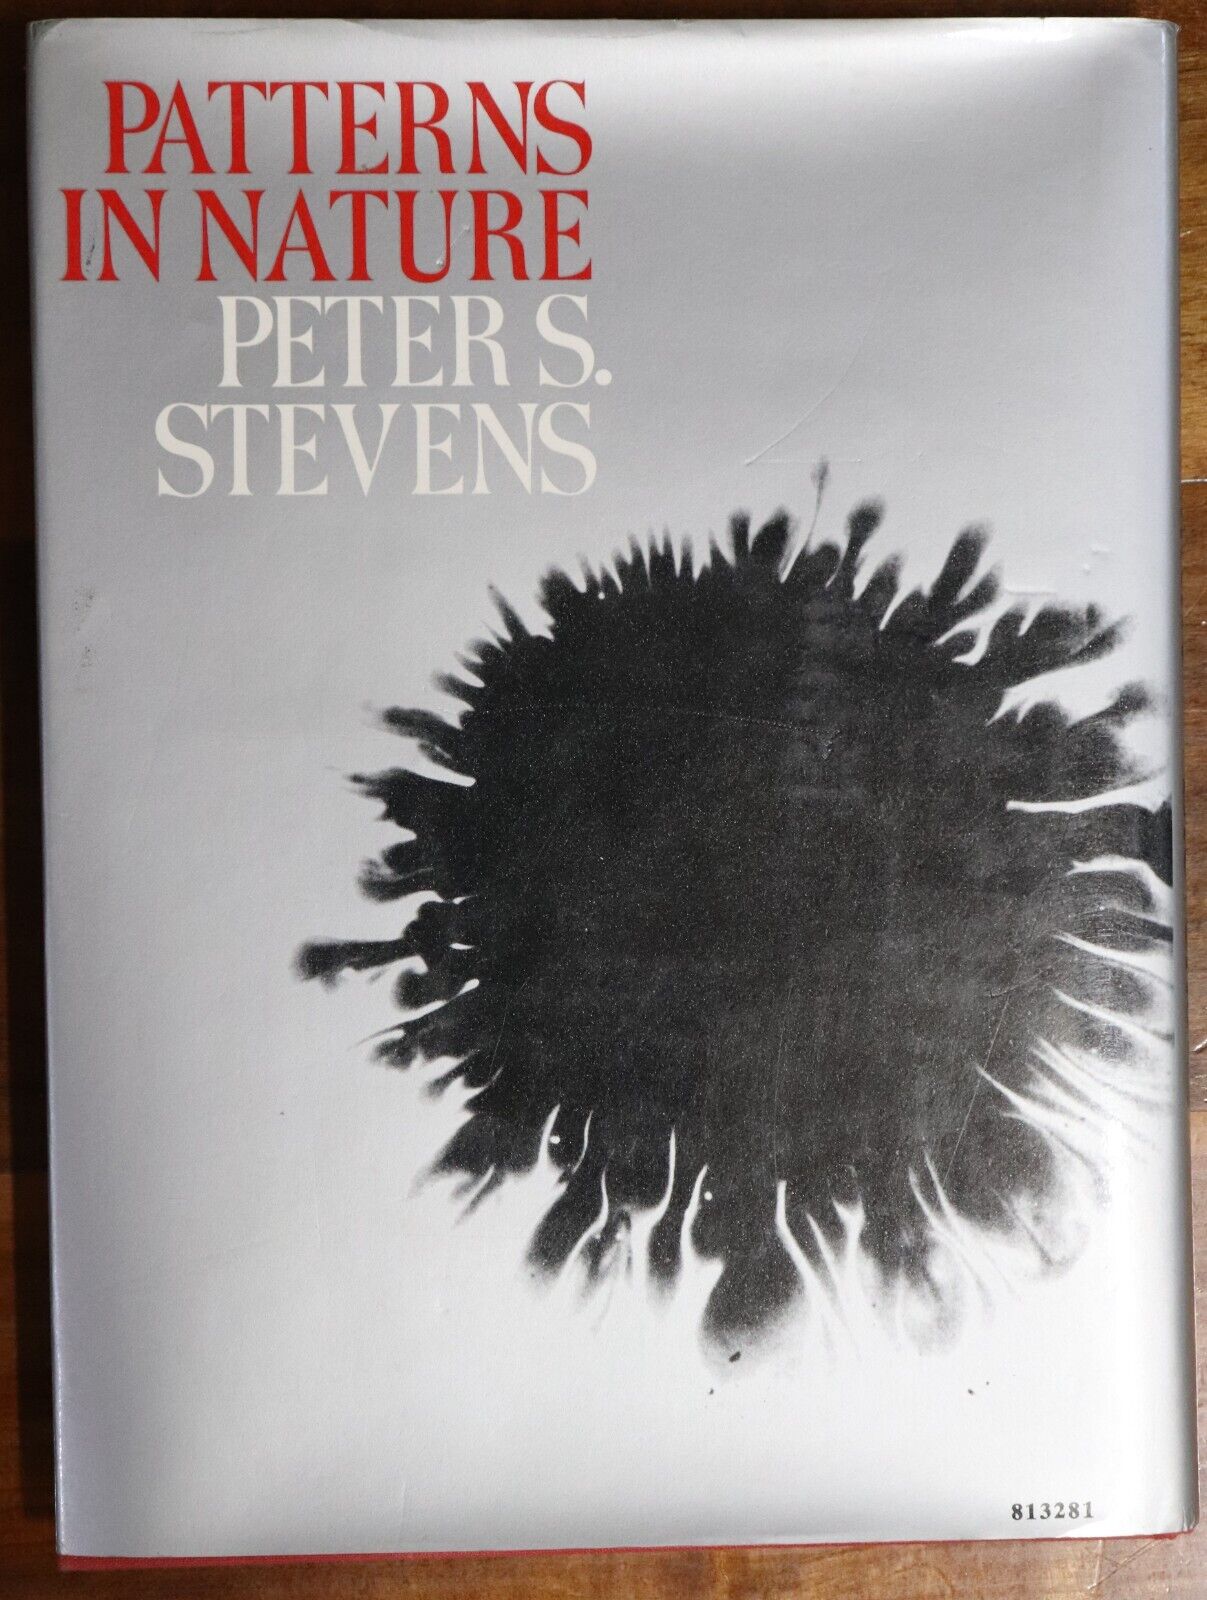 Patterns In Nature by Peter S Stevens - 1974 - 1st Edition Art & Science Book